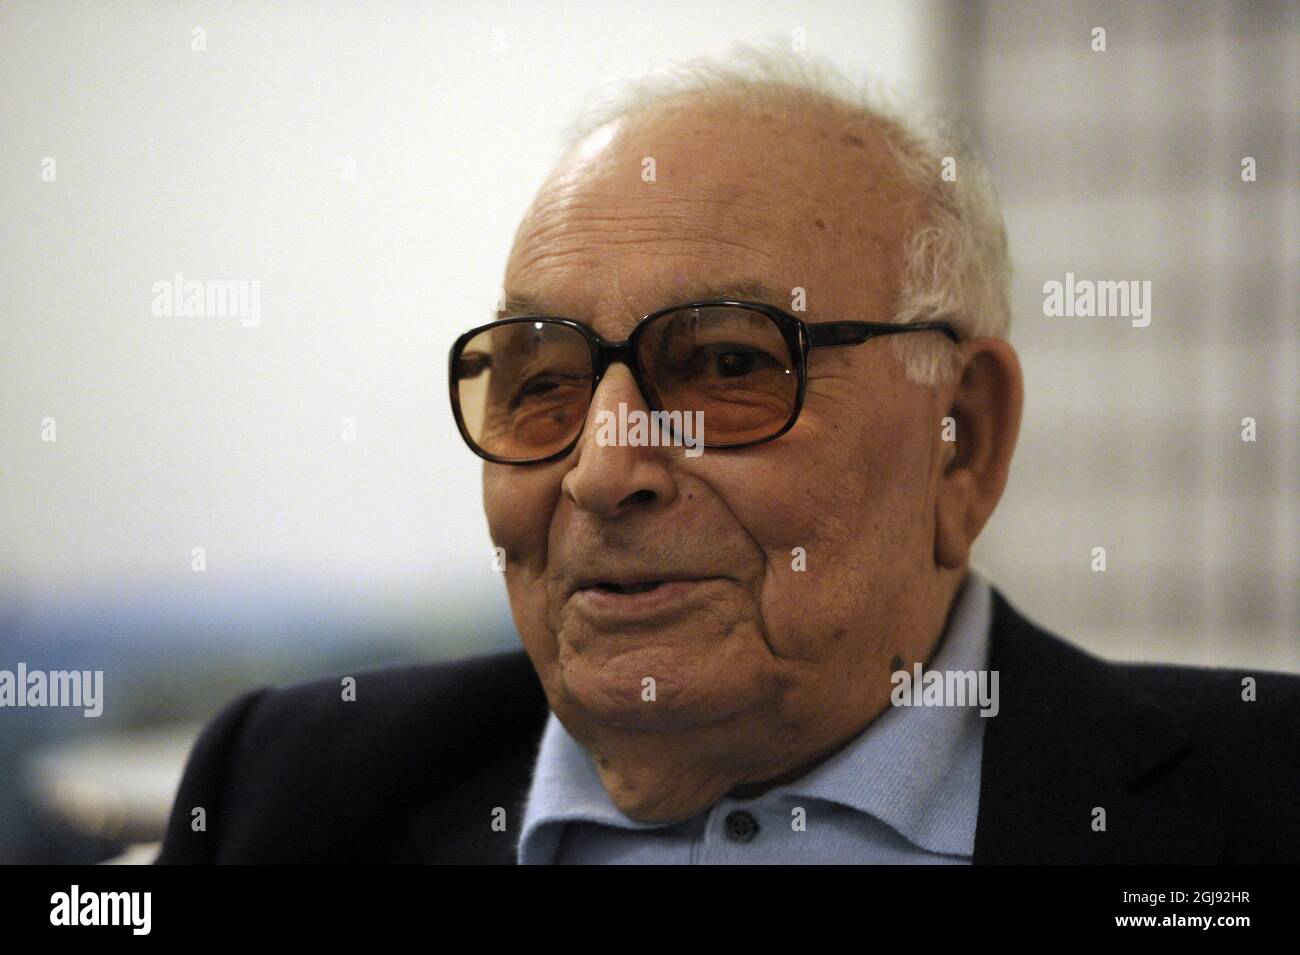 STOCKHOLM 2010-03-04 FILE The Turkish author Yasar Kemal died Saturday February 28 2015, 92 years old. Photo: Leif R Jansson / SCANPIX / Kod 10020  Stock Photo